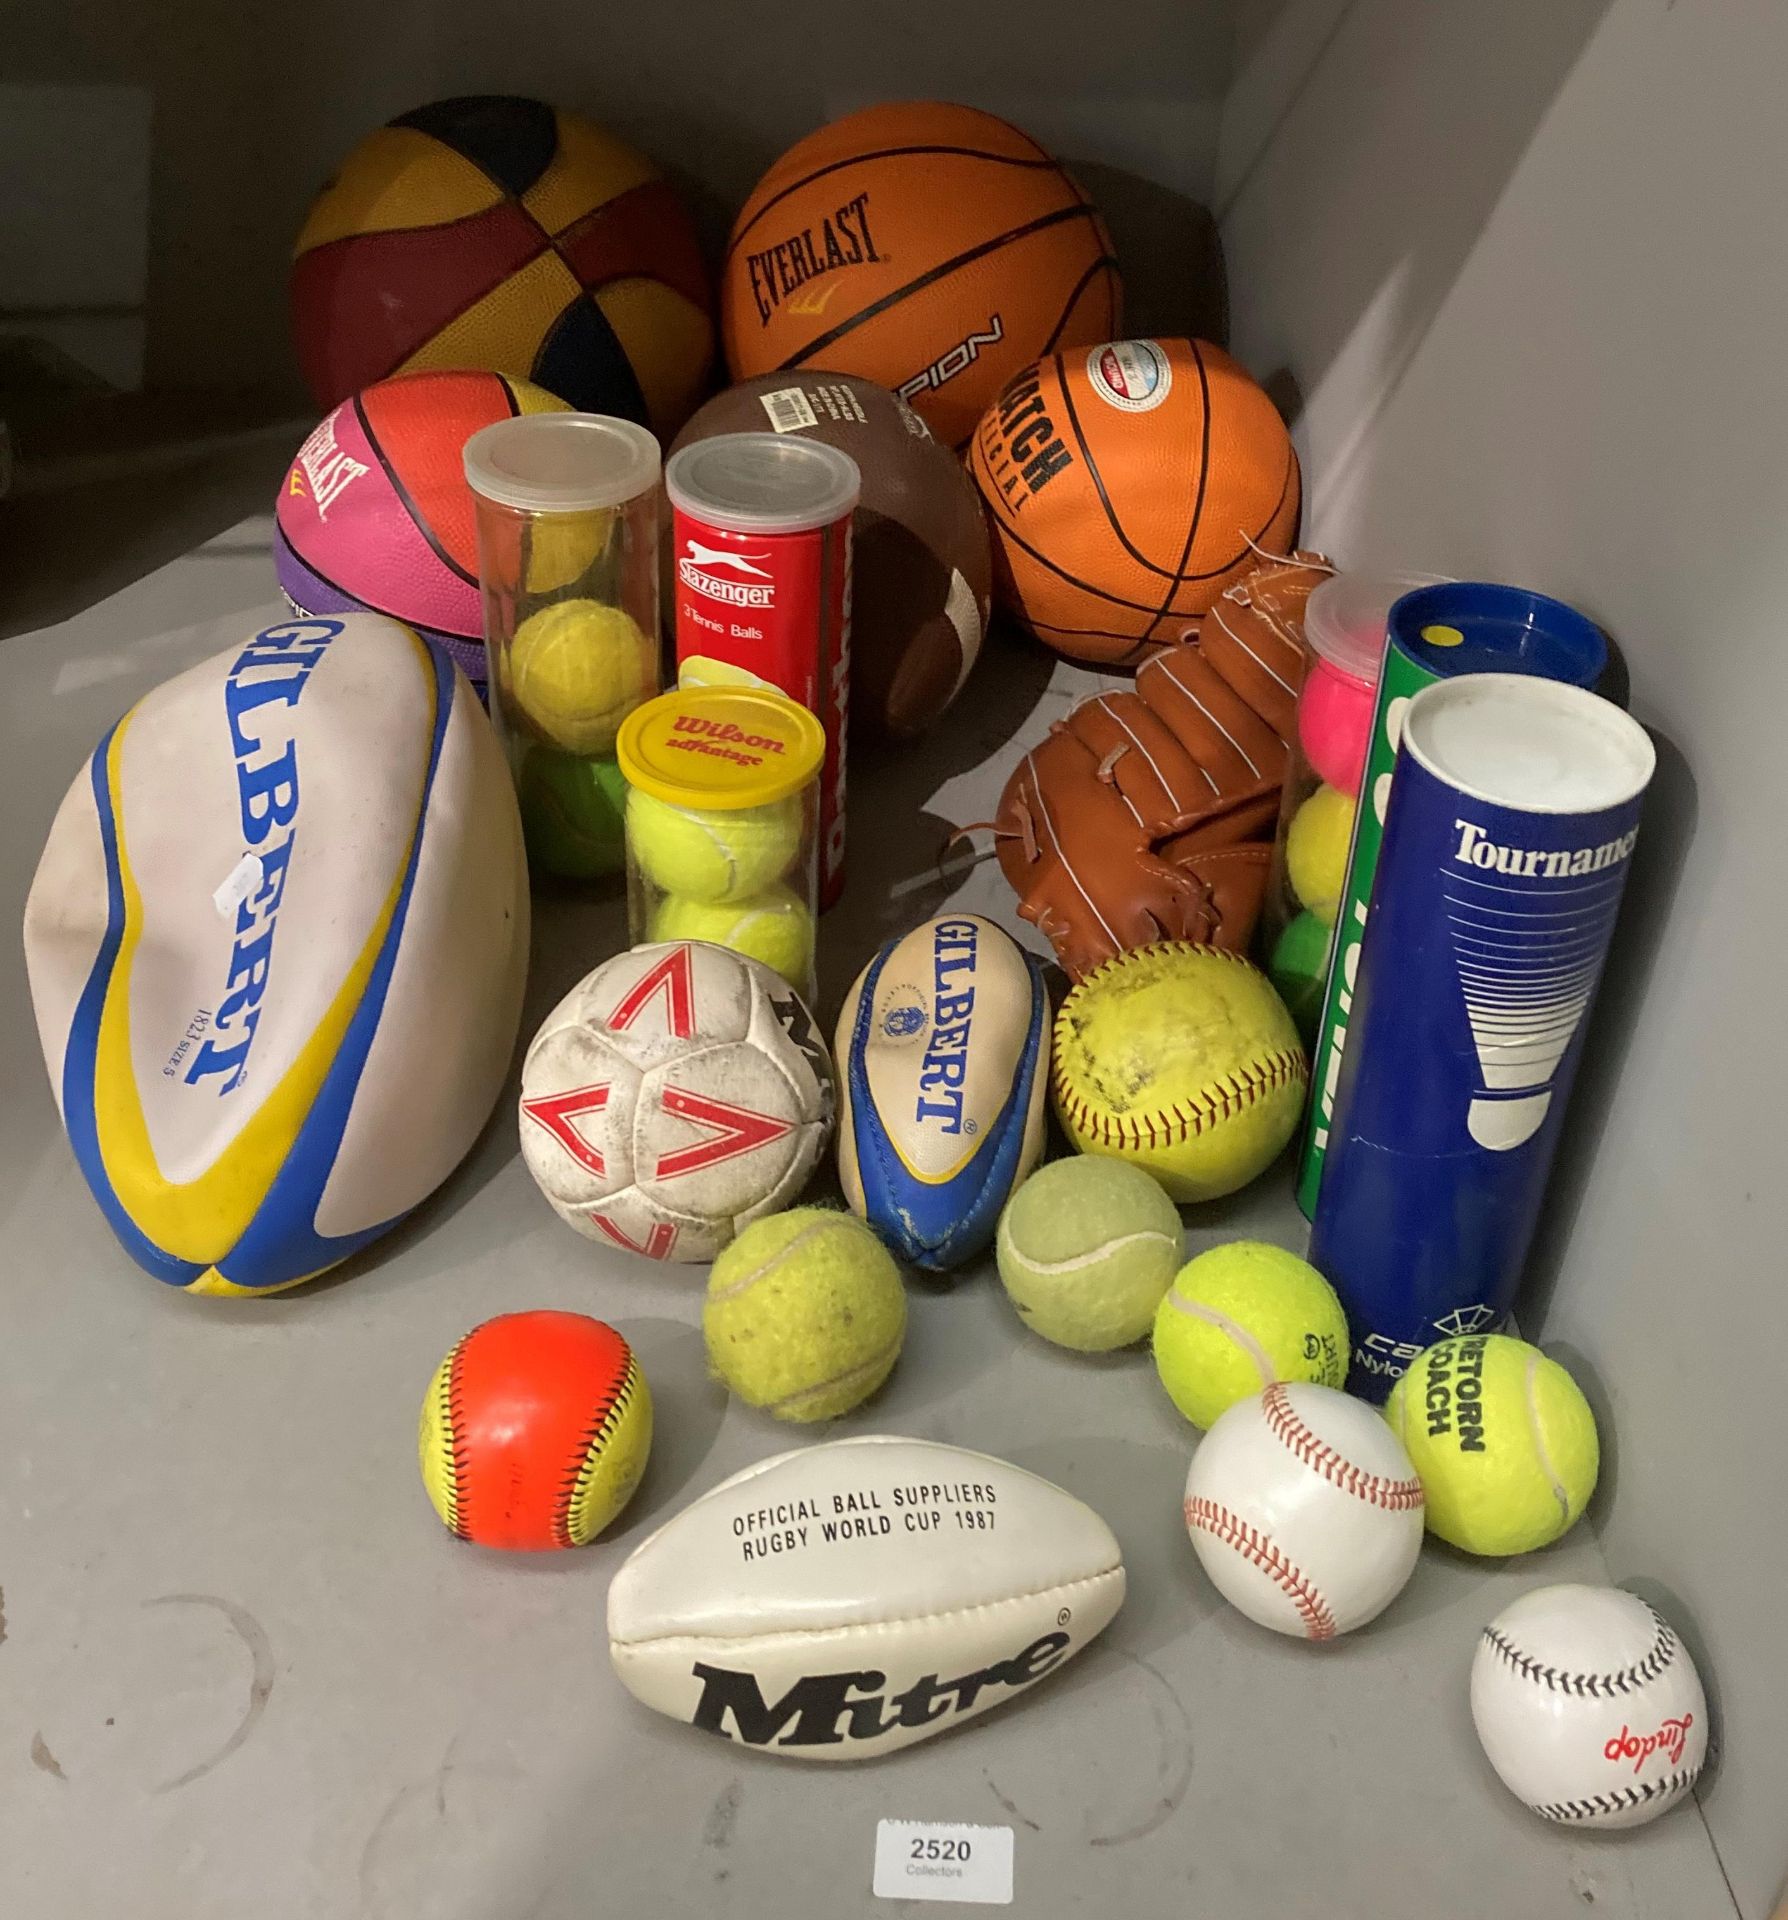 Contents to corner of rack a quantity of sports balls - basketball, rugby, baseball glove and ball,